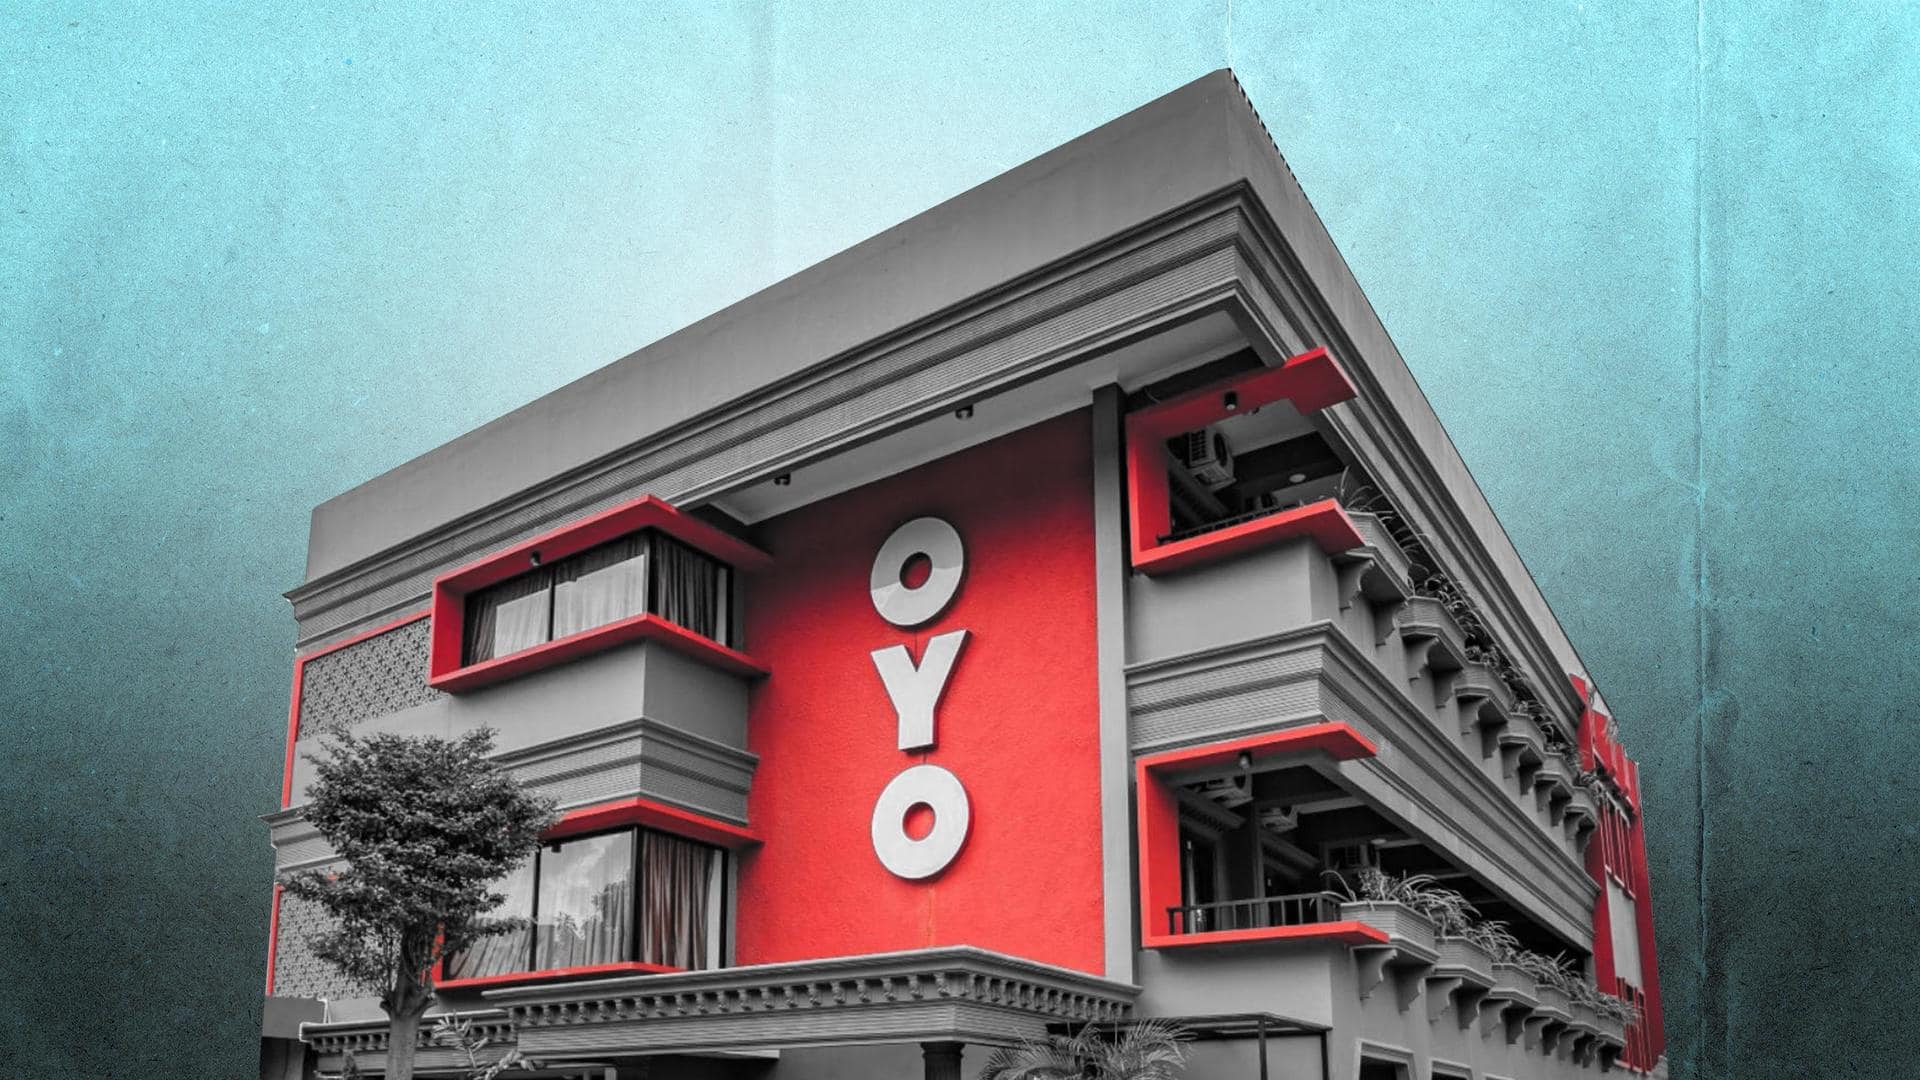 OYO introduces Stay Now, Pay Later: How it works